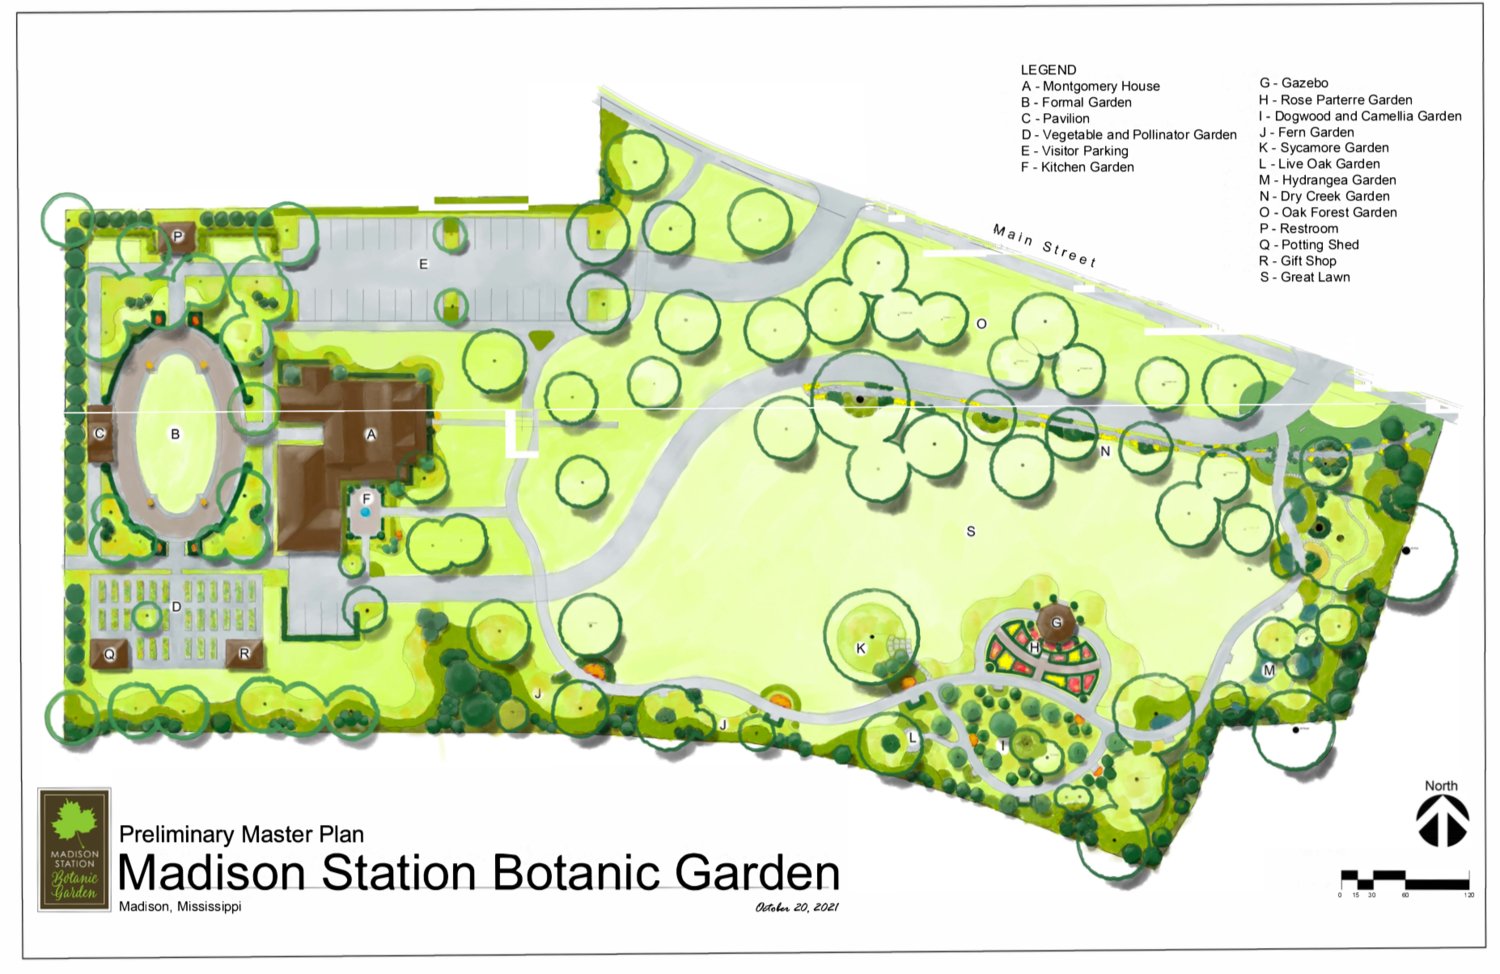 A preliminary site plan shows the vision for the Madison Station Botanical Garden located on the grounds of the historic Montgomery House.